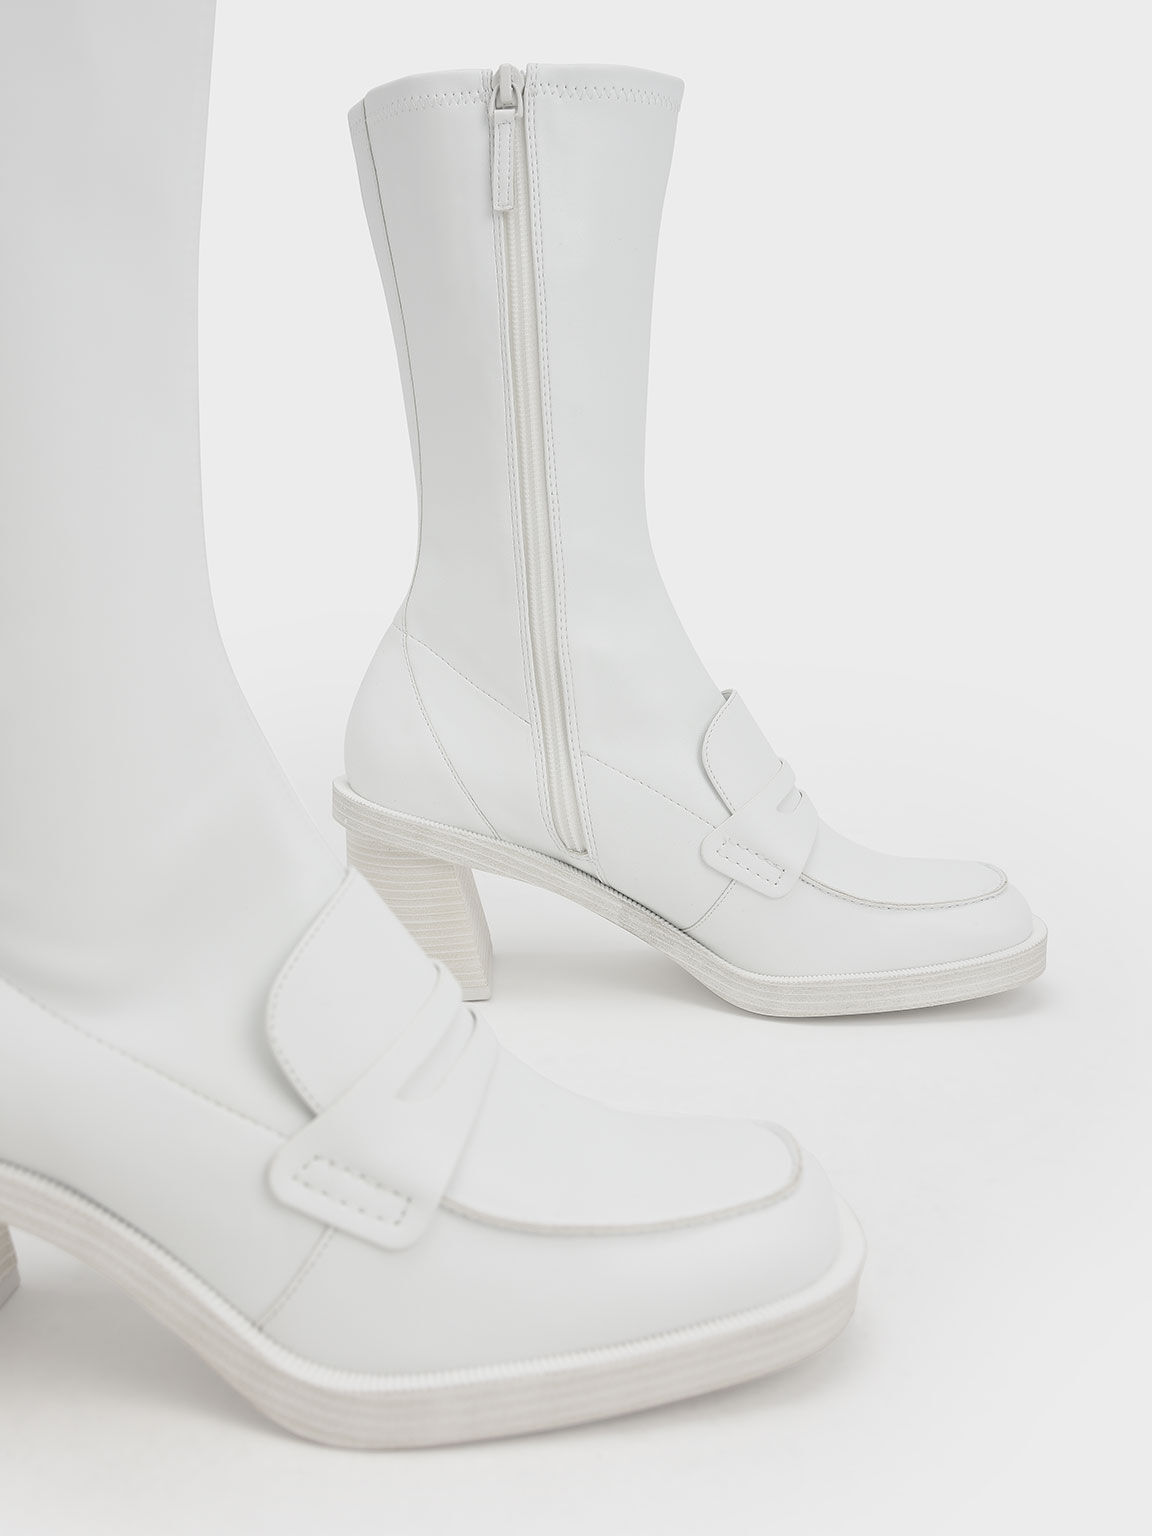 Haisley Penny Loafer Calf Boots, White, hi-res